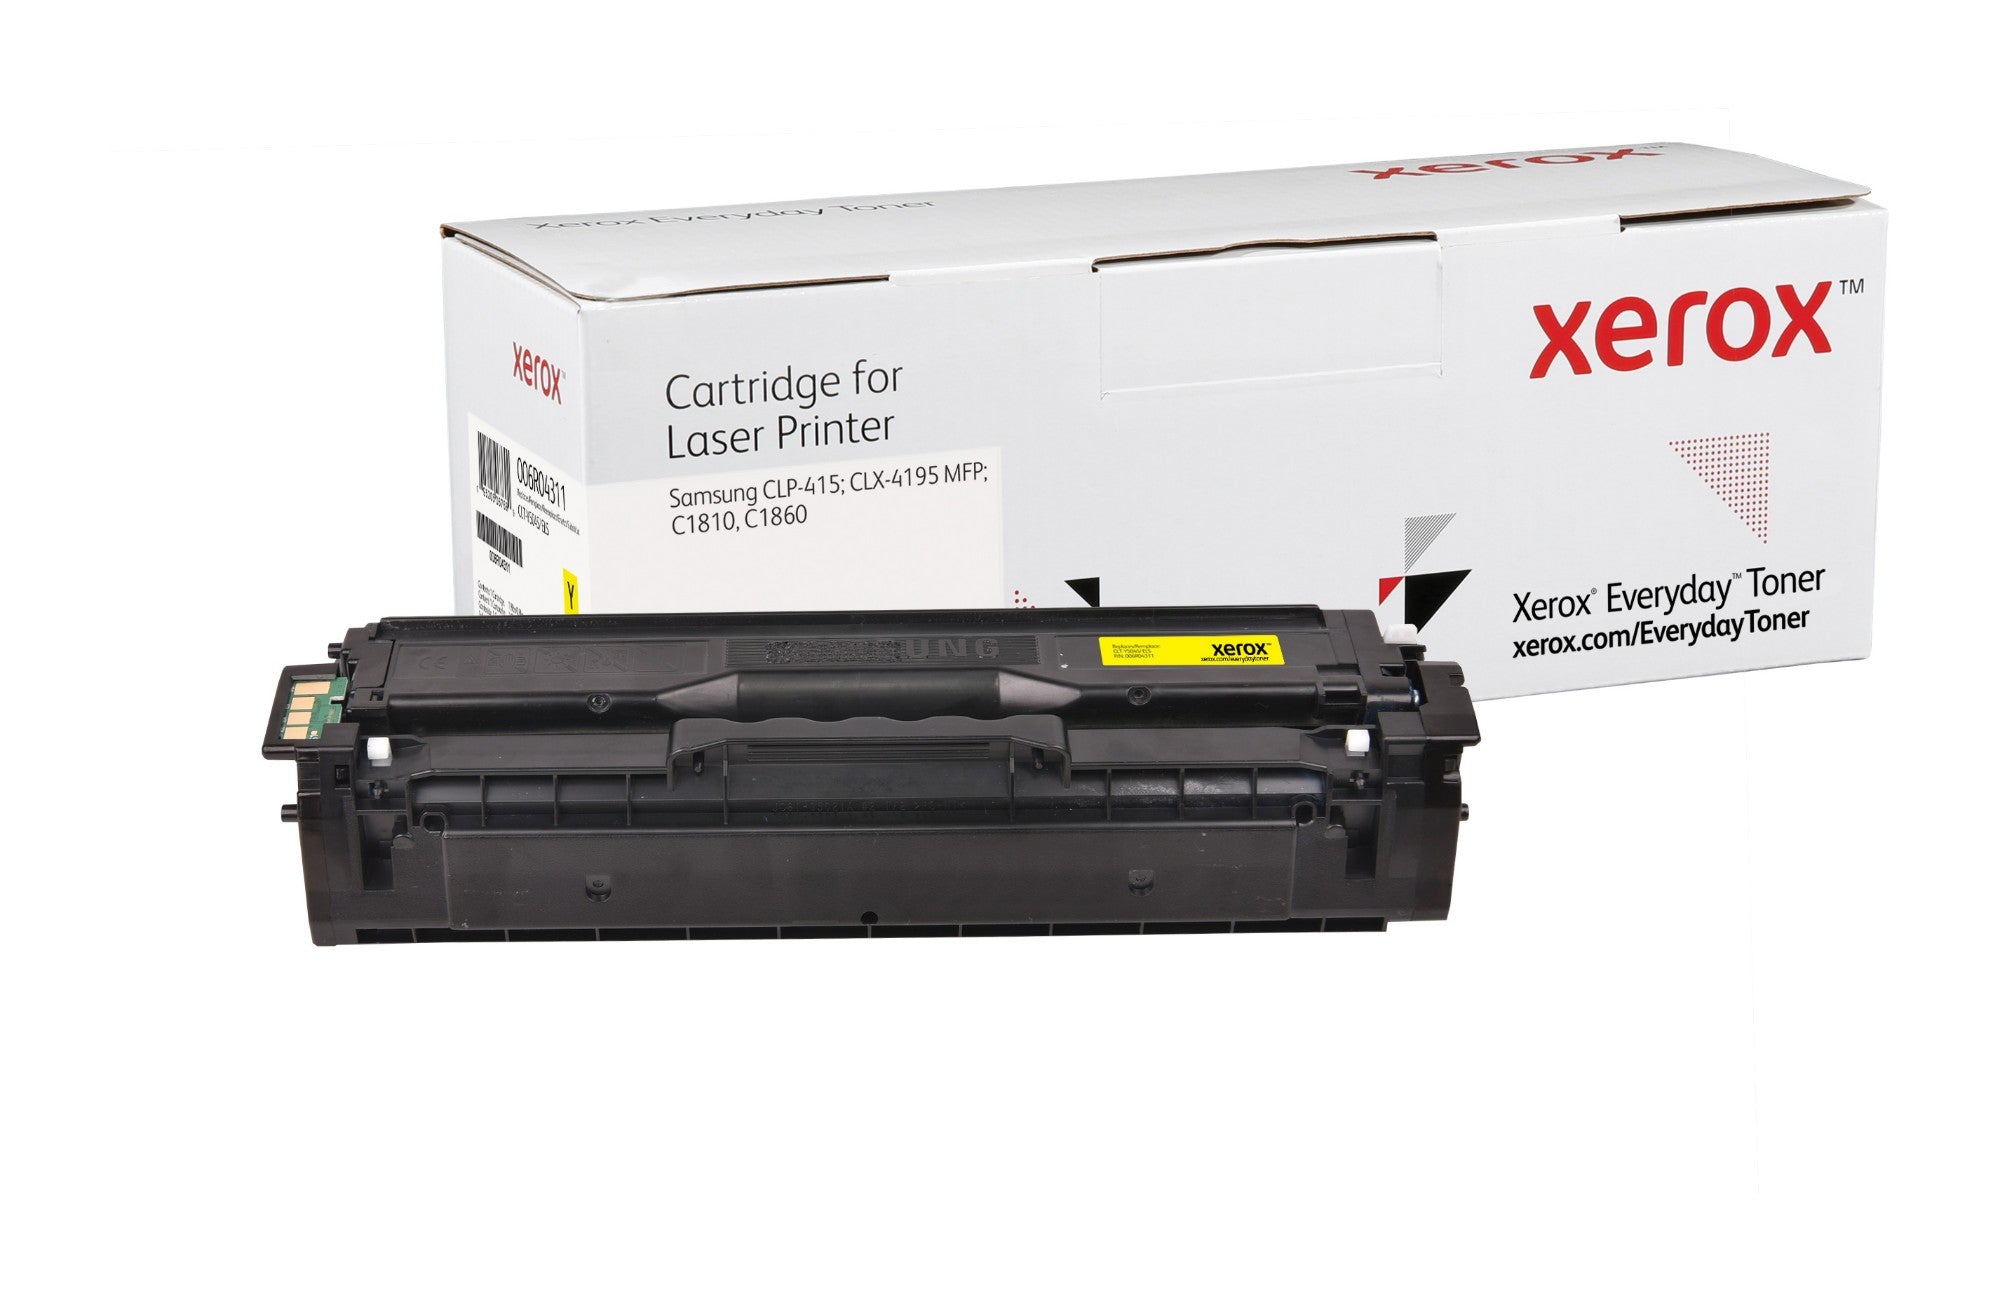 Xerox 006R04311 Toner cartridge yellow, 1.8K pages (replaces Samsung Y504) for Samsung CLP 415